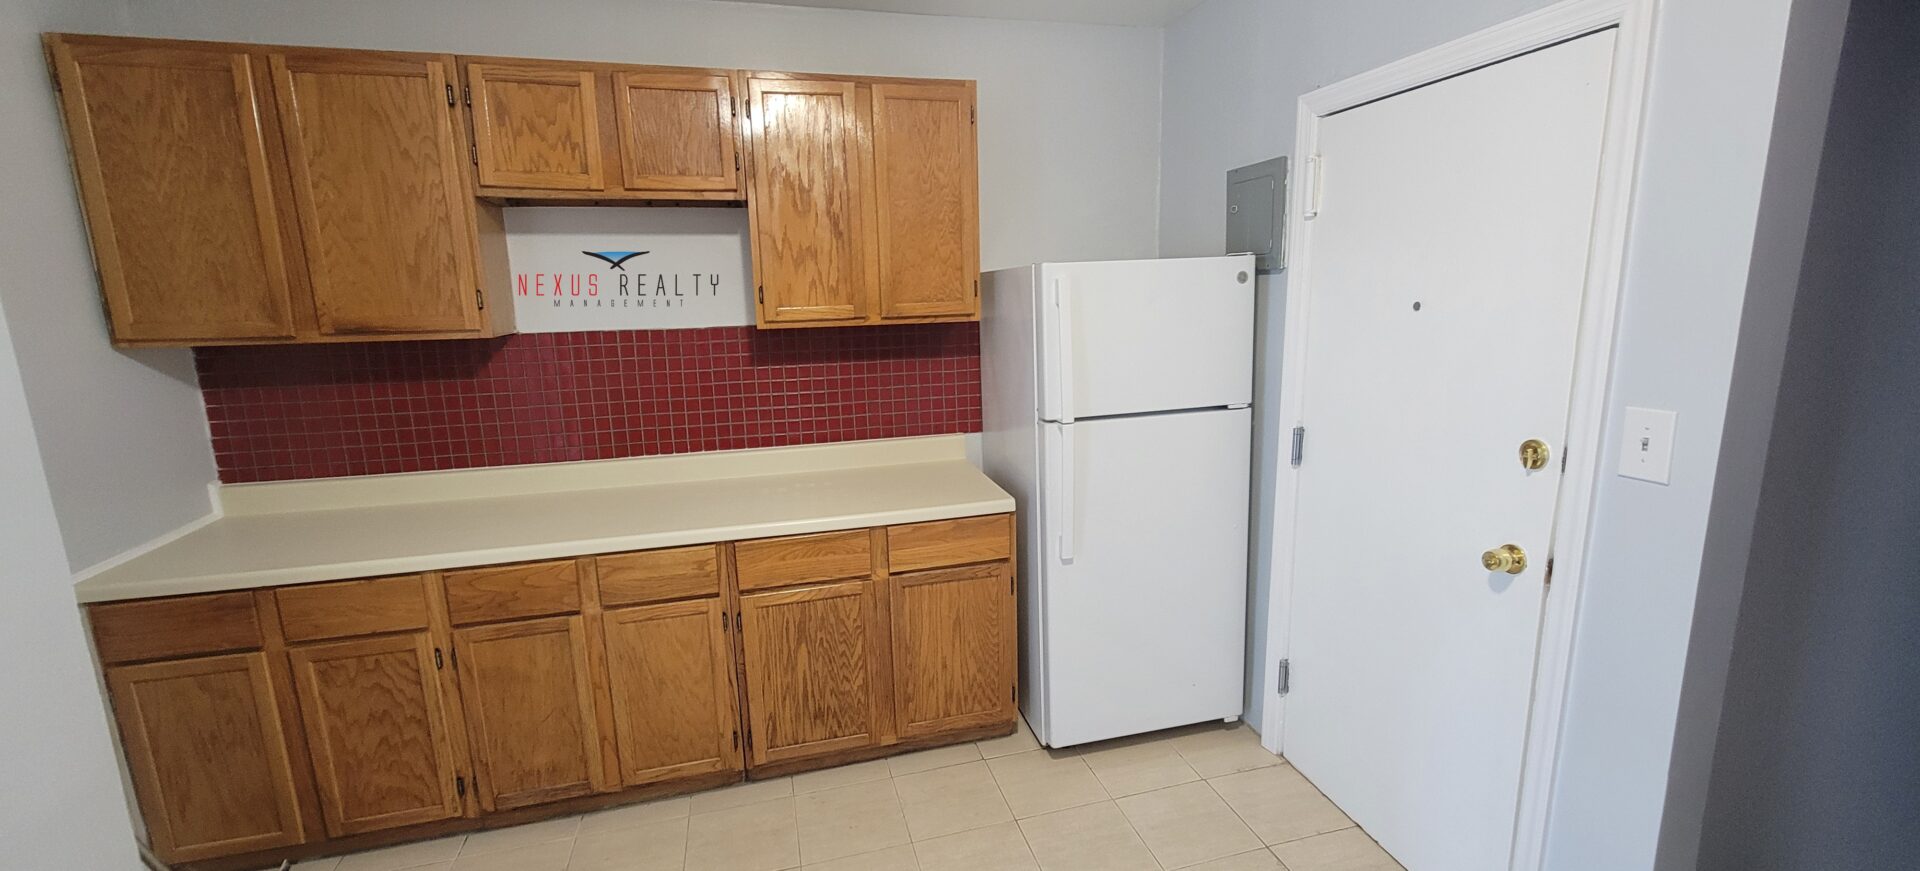 3 Bedroom apartment in Brooklyn ONLY $2750